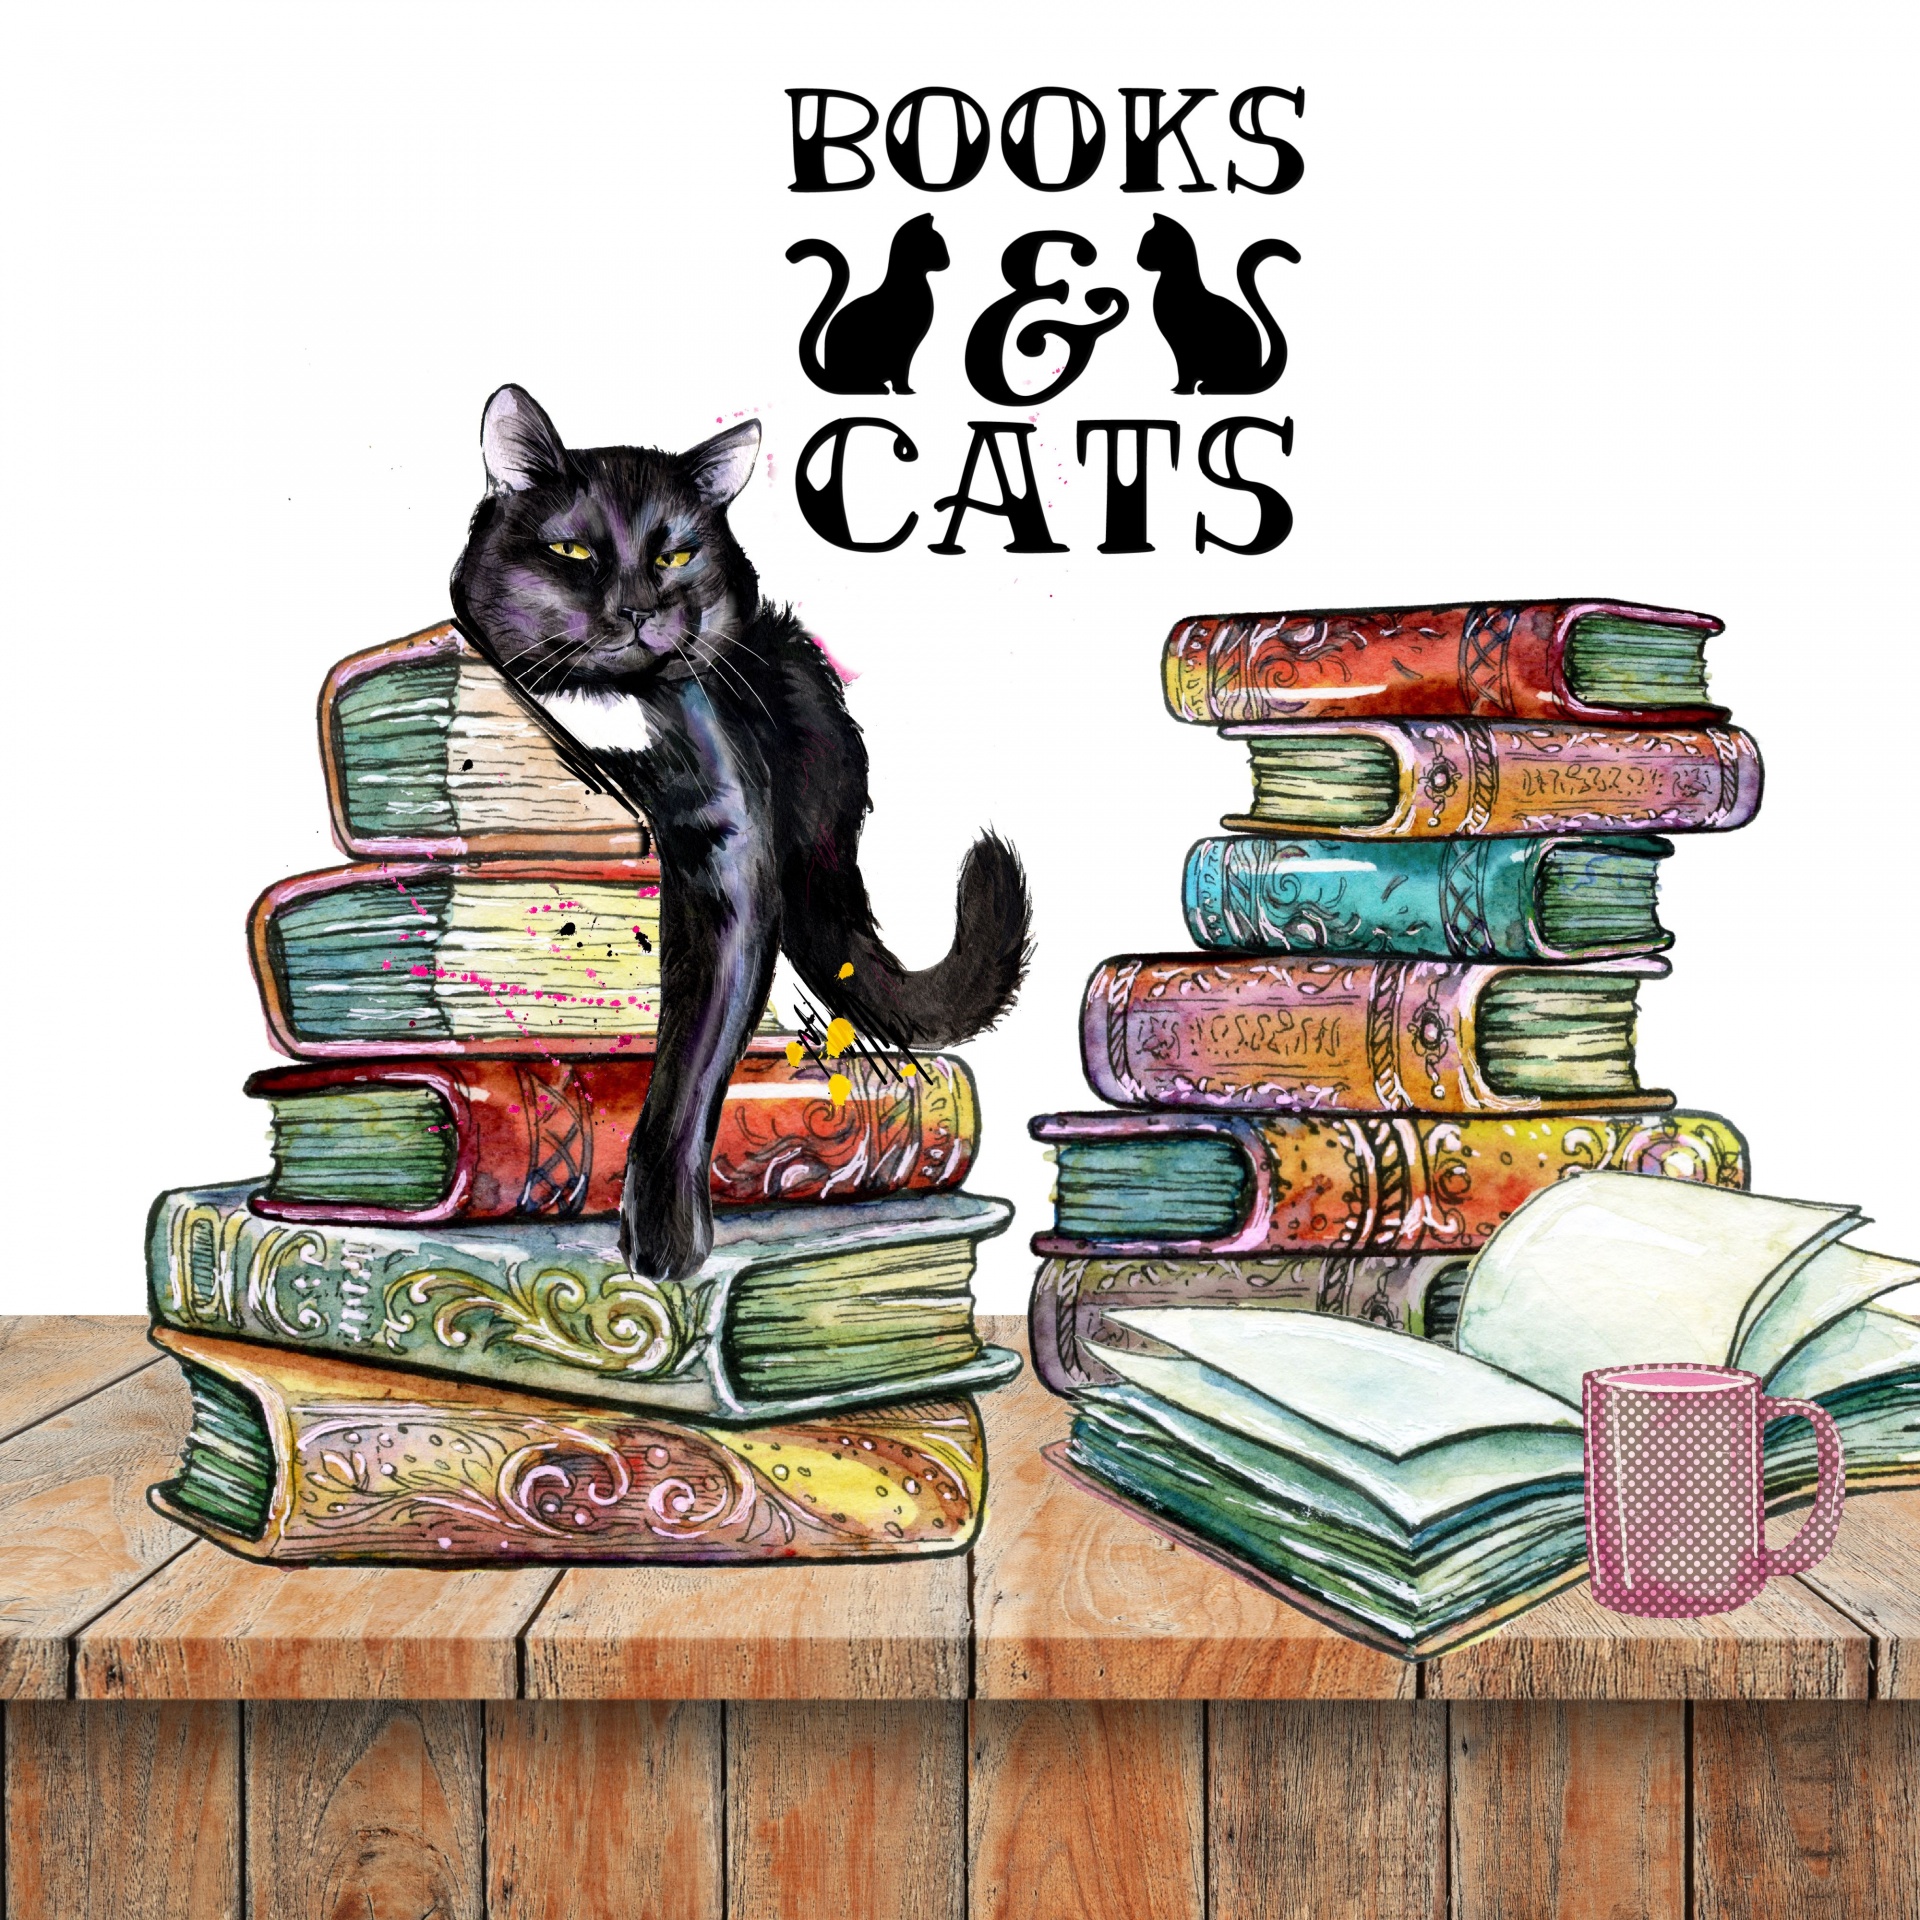 beautiful books piled on a wooden table with a cat and coffee mug